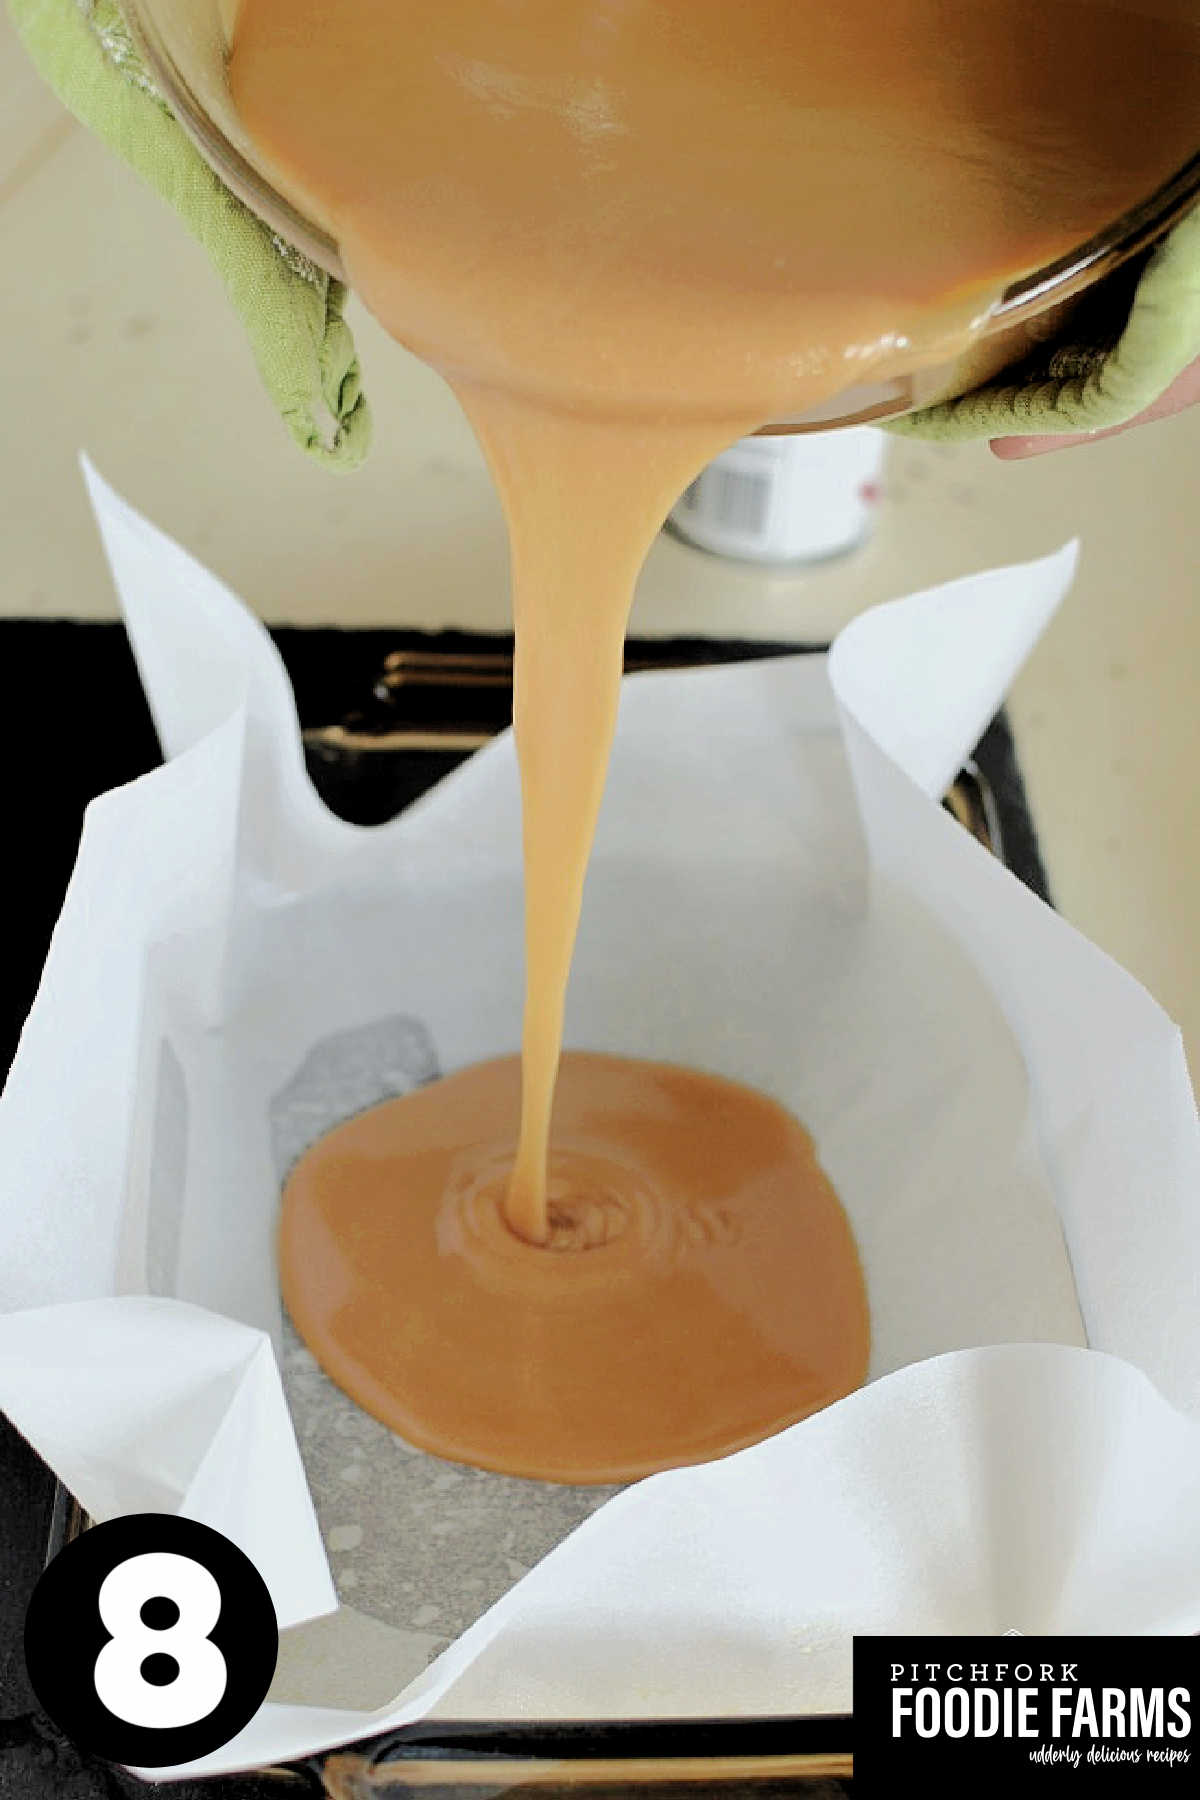 Caramel candy being poured into a parchment paper lined baking dish.